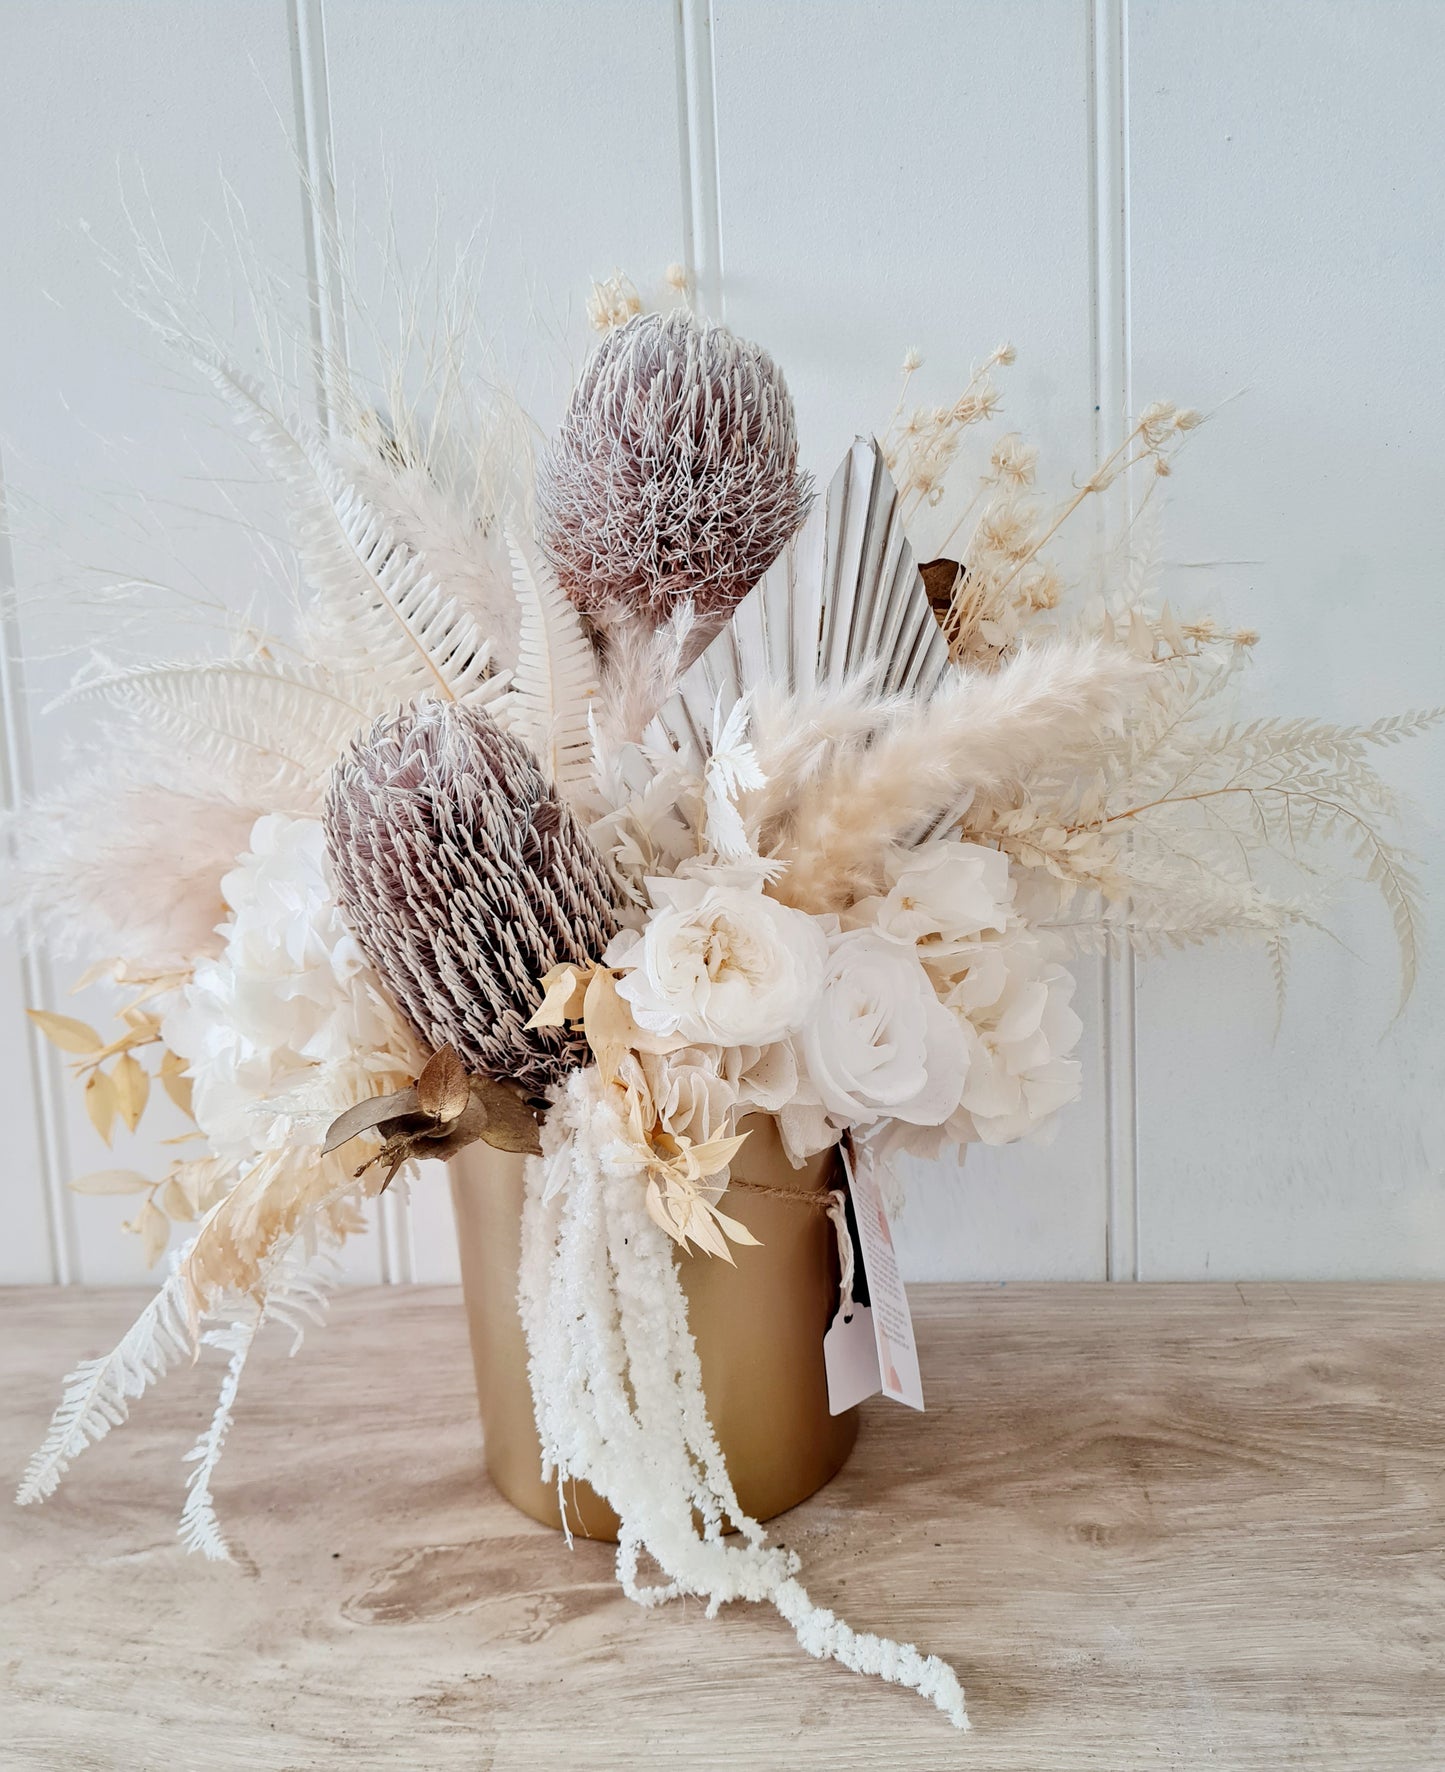 Dried flower arrangement Perth. Long lasting flowers for gifts and home decor  